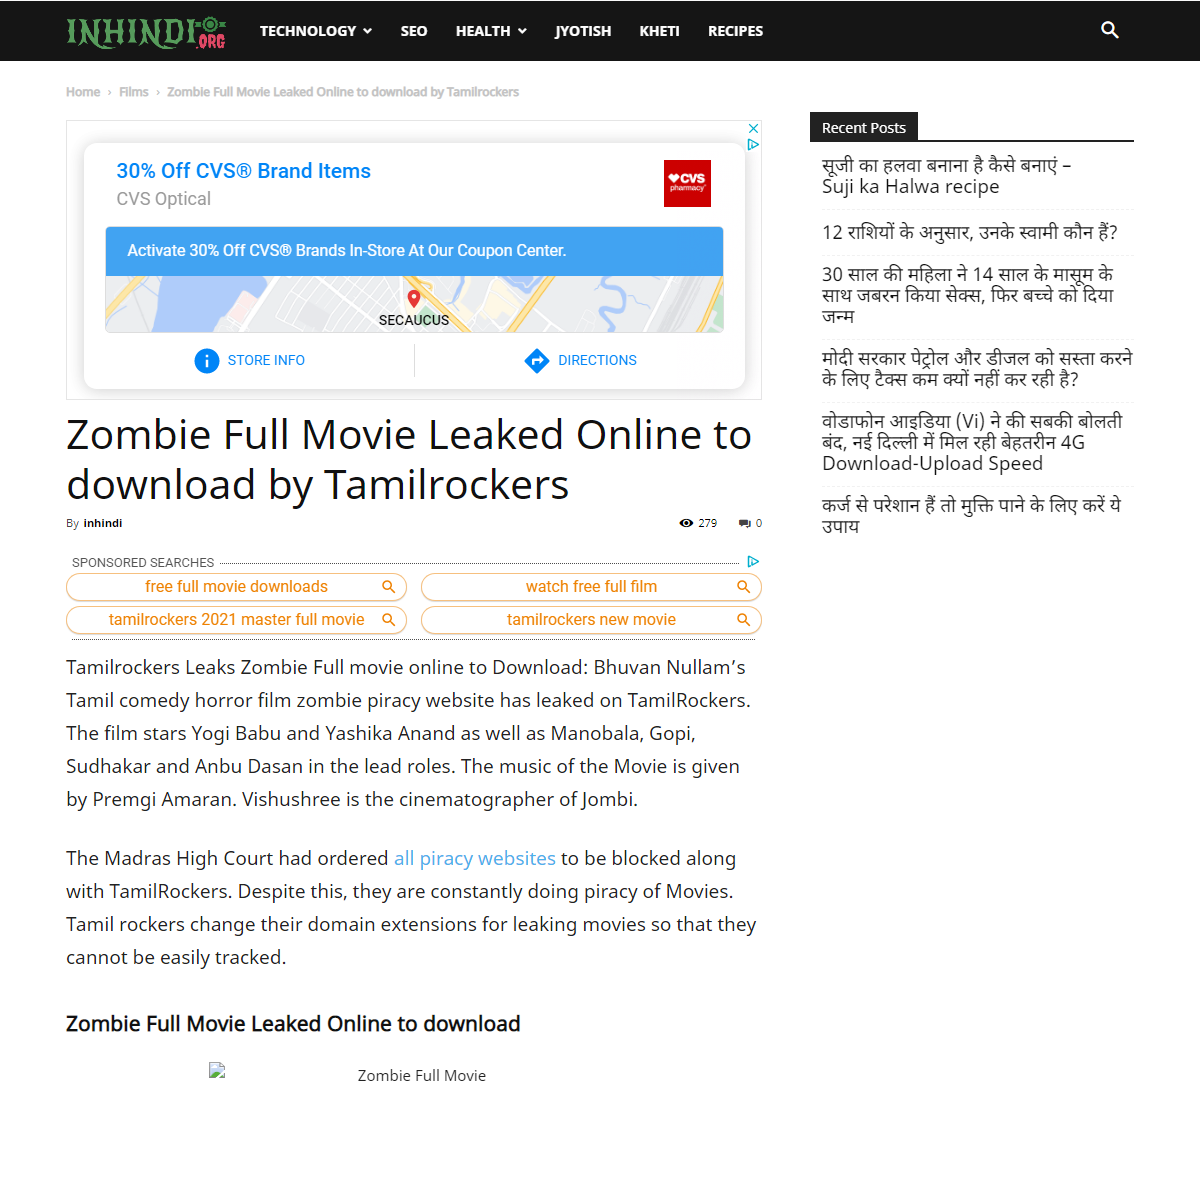 A complete backup of https://www.inhindi.org/zombie-full-movie-leaked-online/